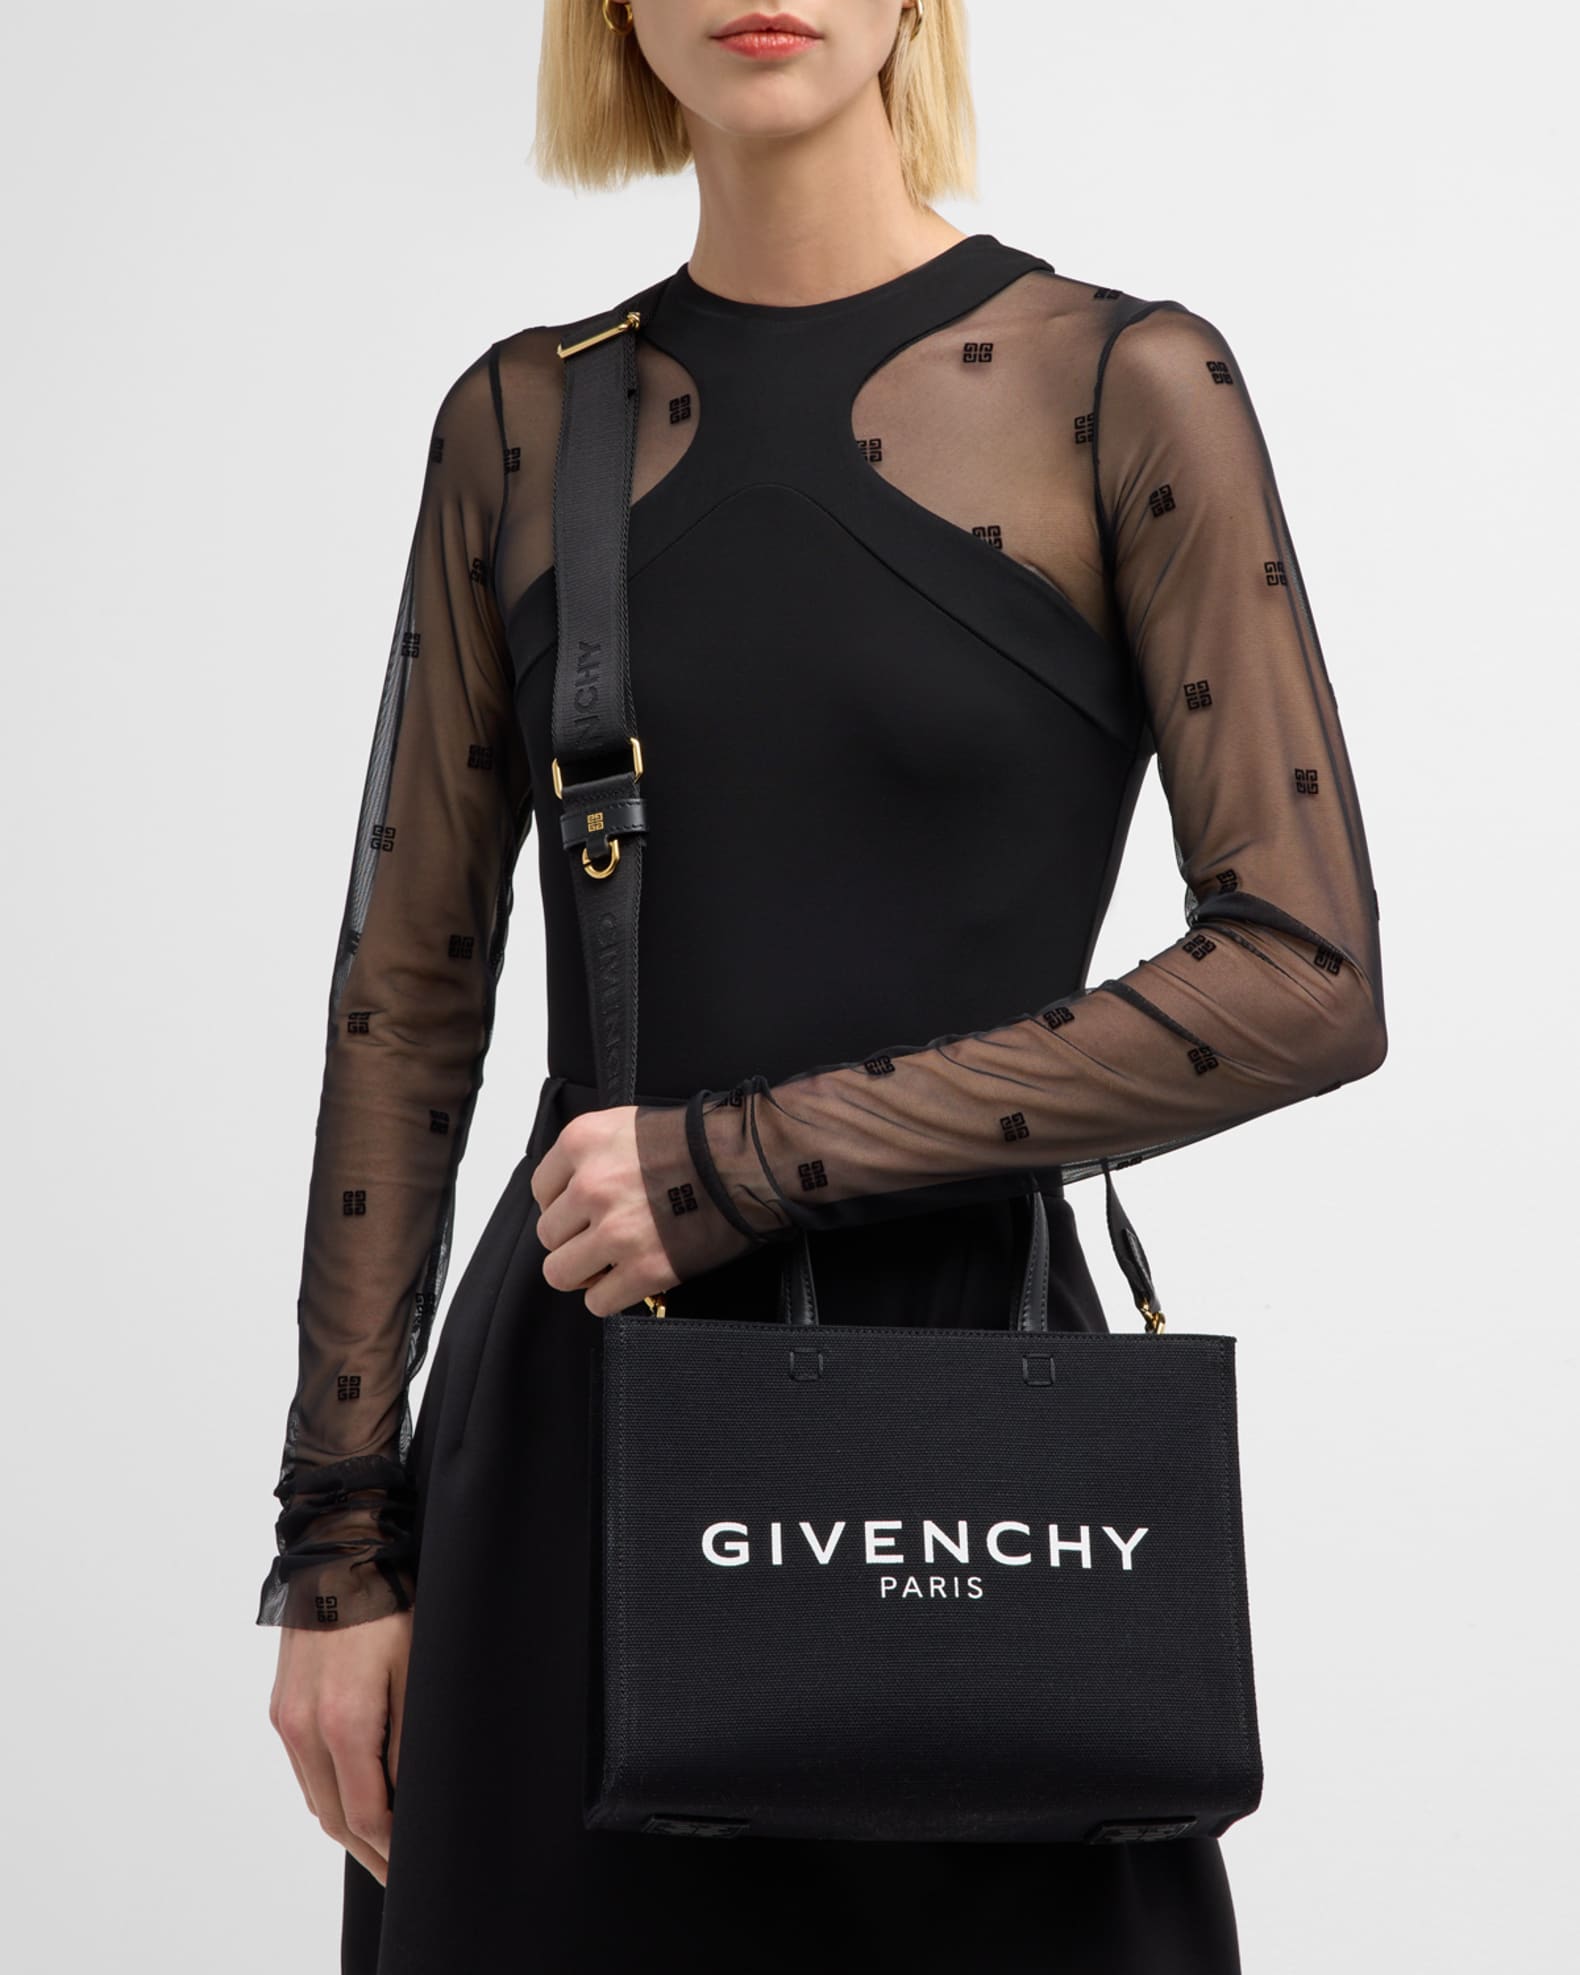 Givenchy G-Tote Small Shopping Bag in Canvas | Neiman Marcus